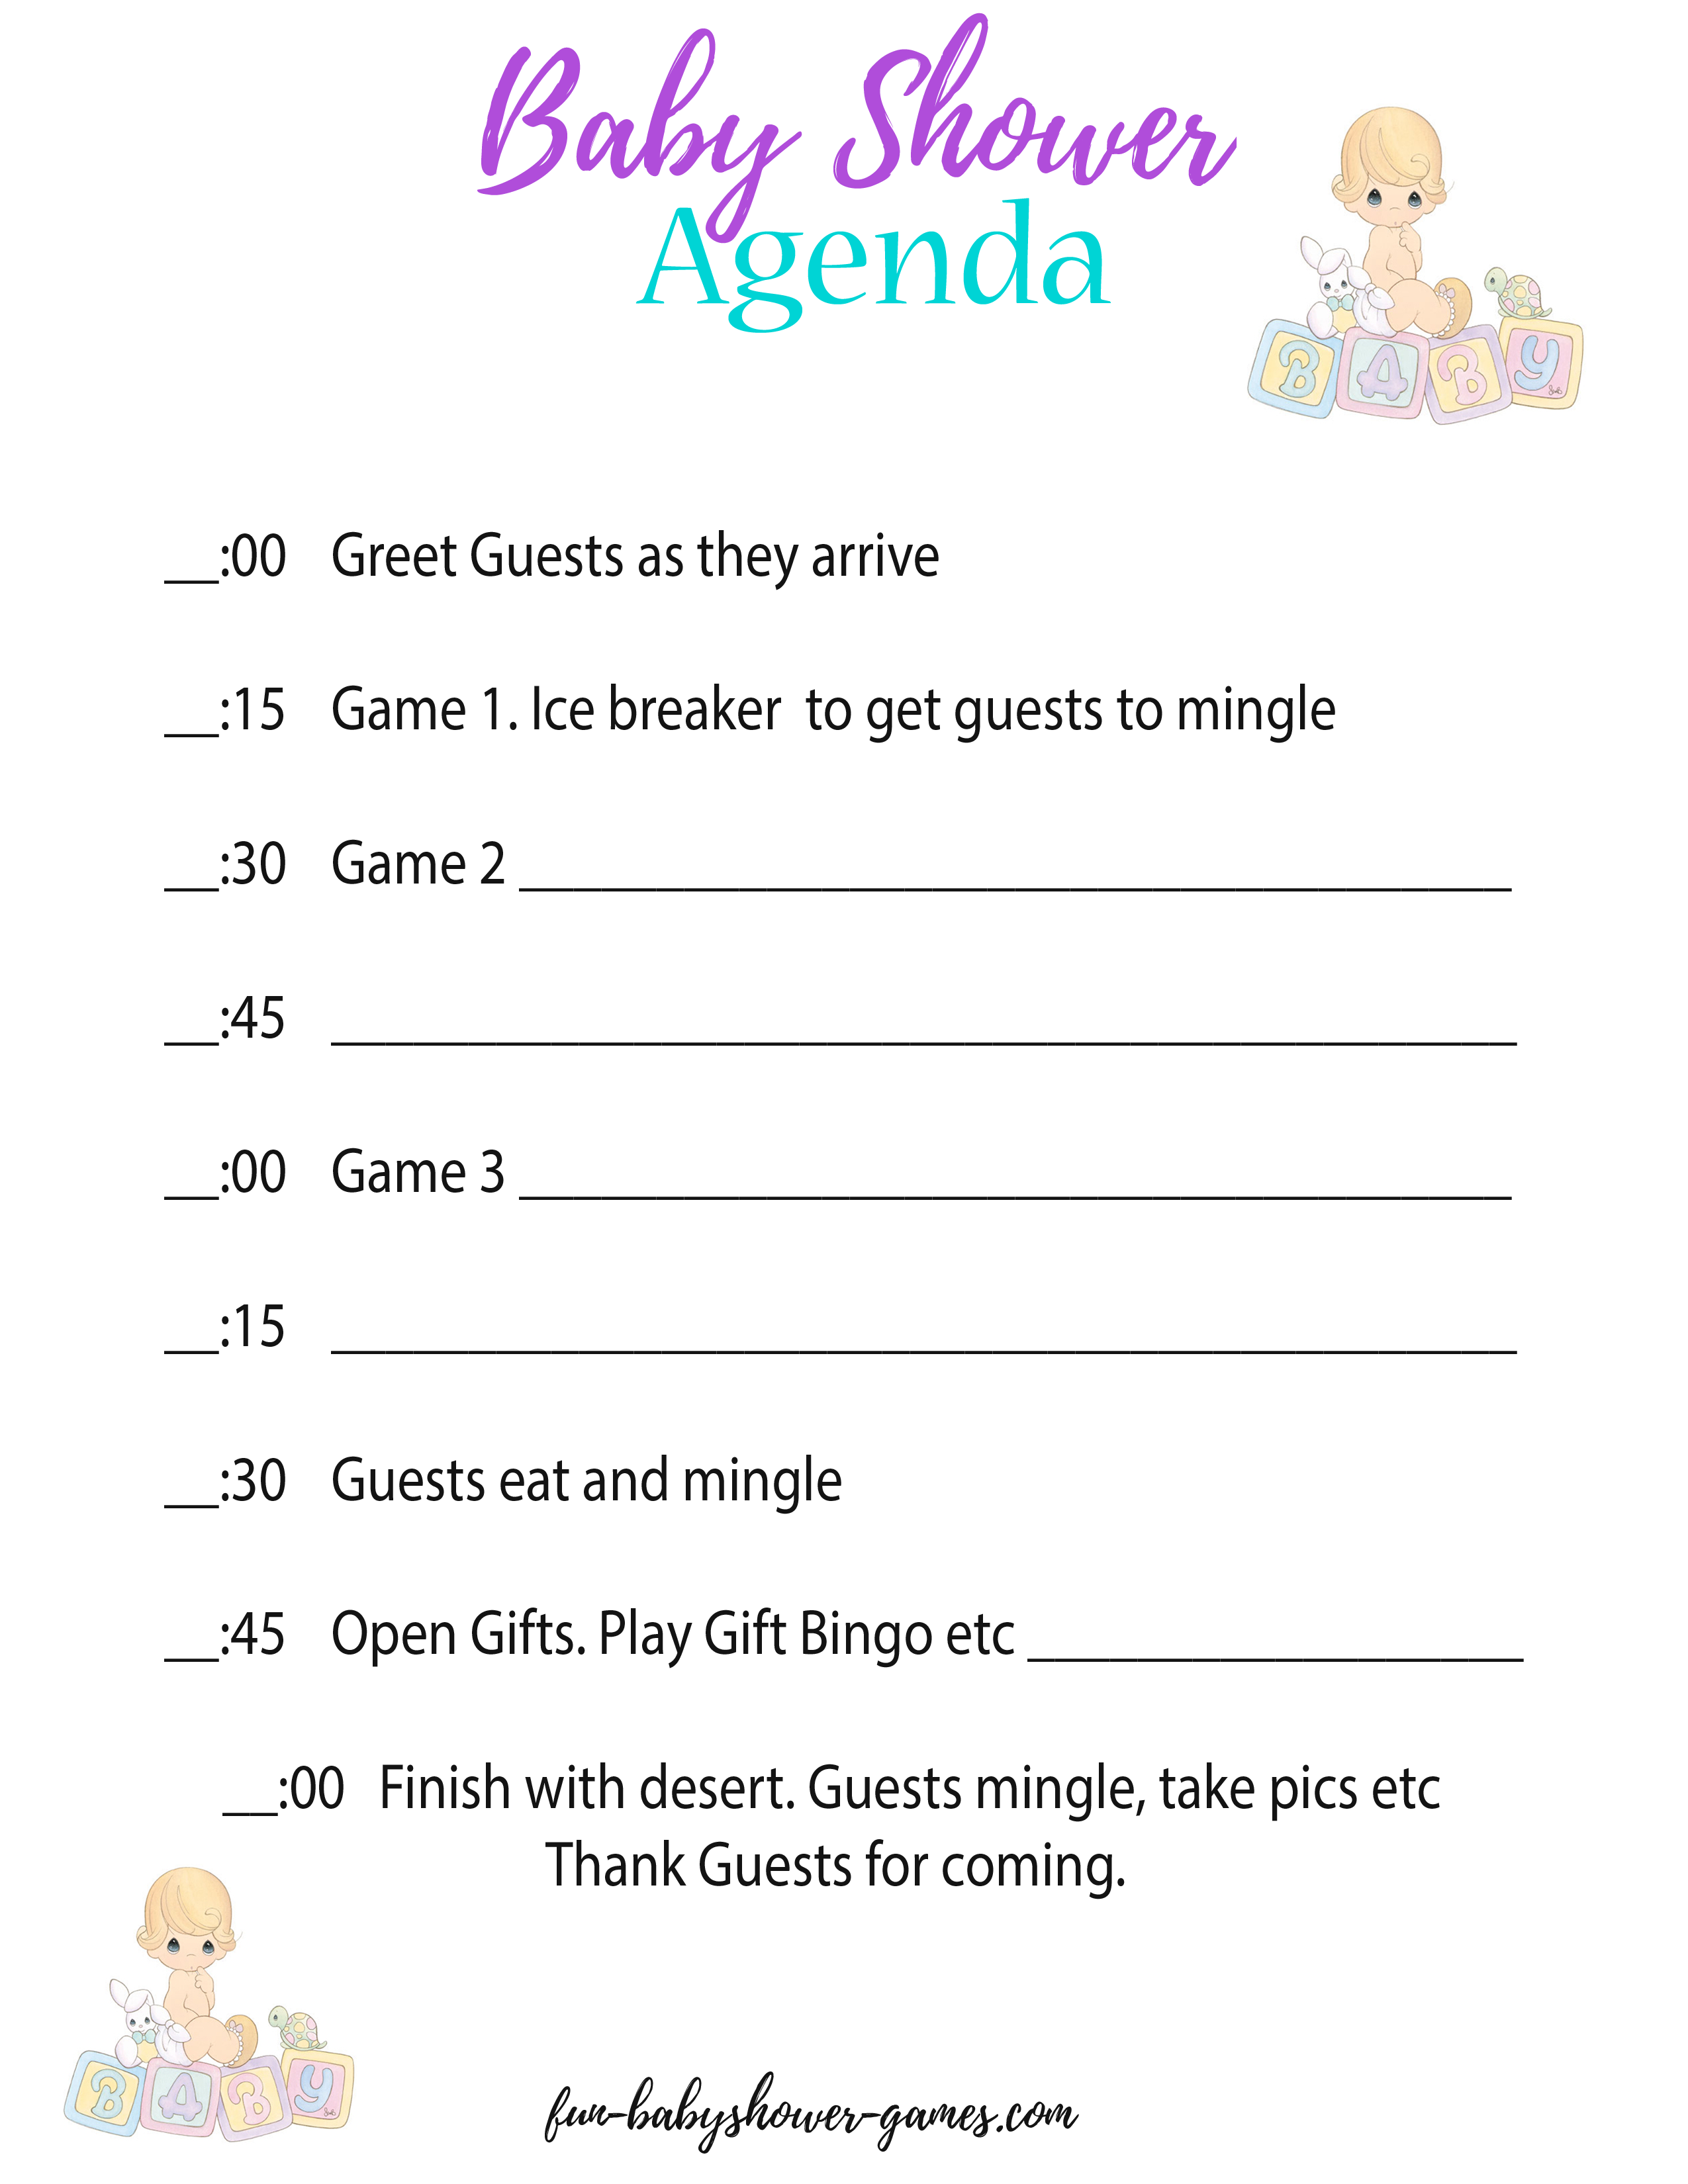 A baby shower agenda will help keep everything running according to plan during the baby shower party.